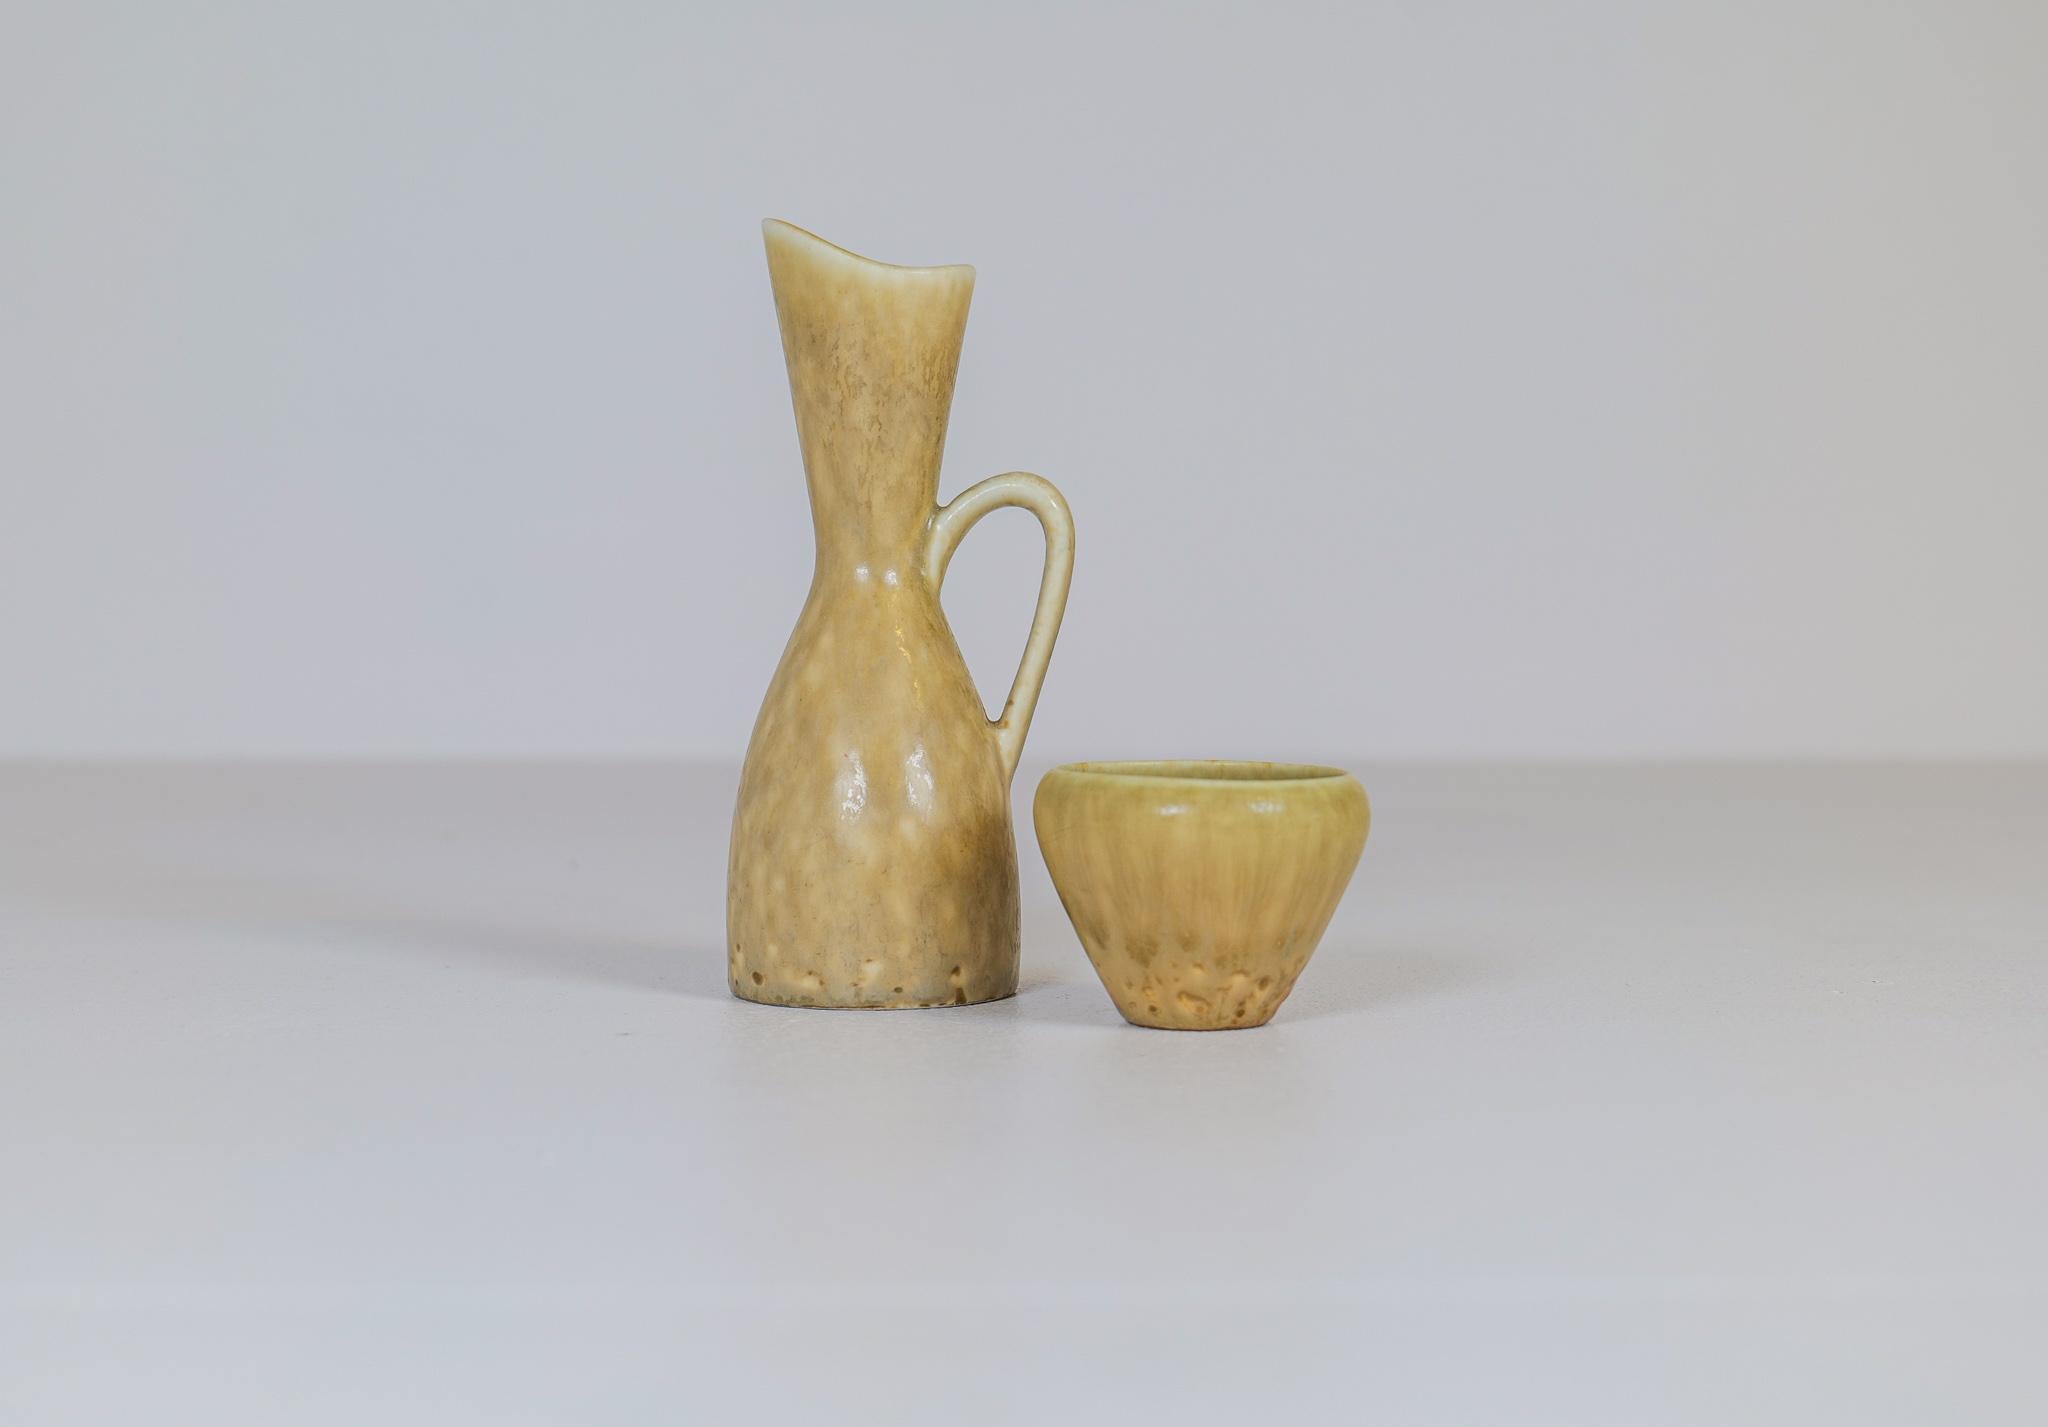 Very nice set of one small bowl and one small vase. Made in Sweden in the 1950s and designed by Stålhane. The famous factory Rörstrand was the manufacture. 

Good condition

Measures bowl 7 x5,5 cm vase H 17 cm D 7 cm.